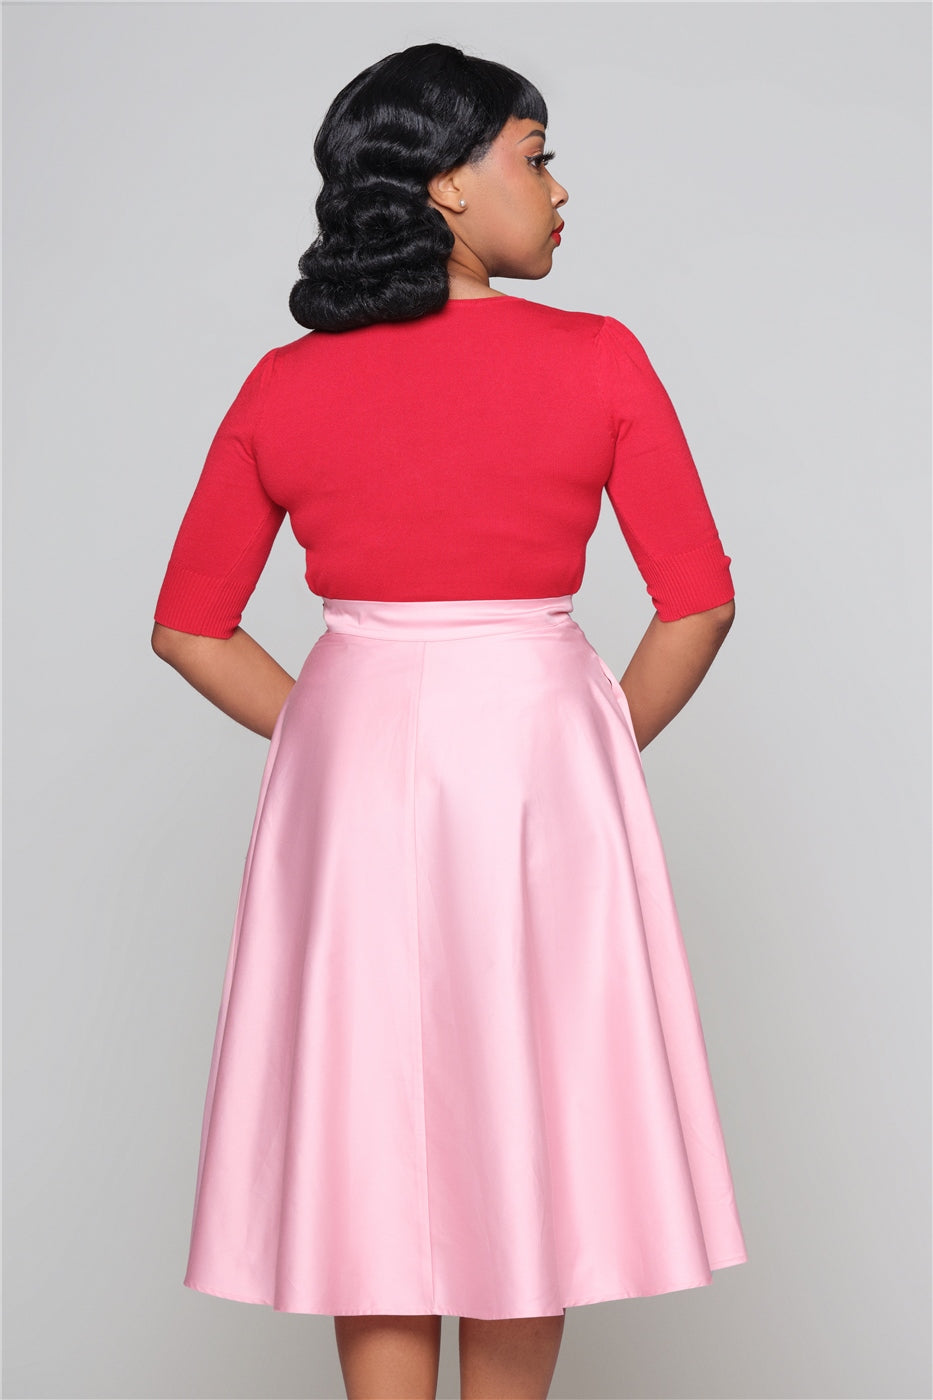 Tall, pretty woman standing straight wearing a red top and pink 50s swing skirt looking over her shoulder